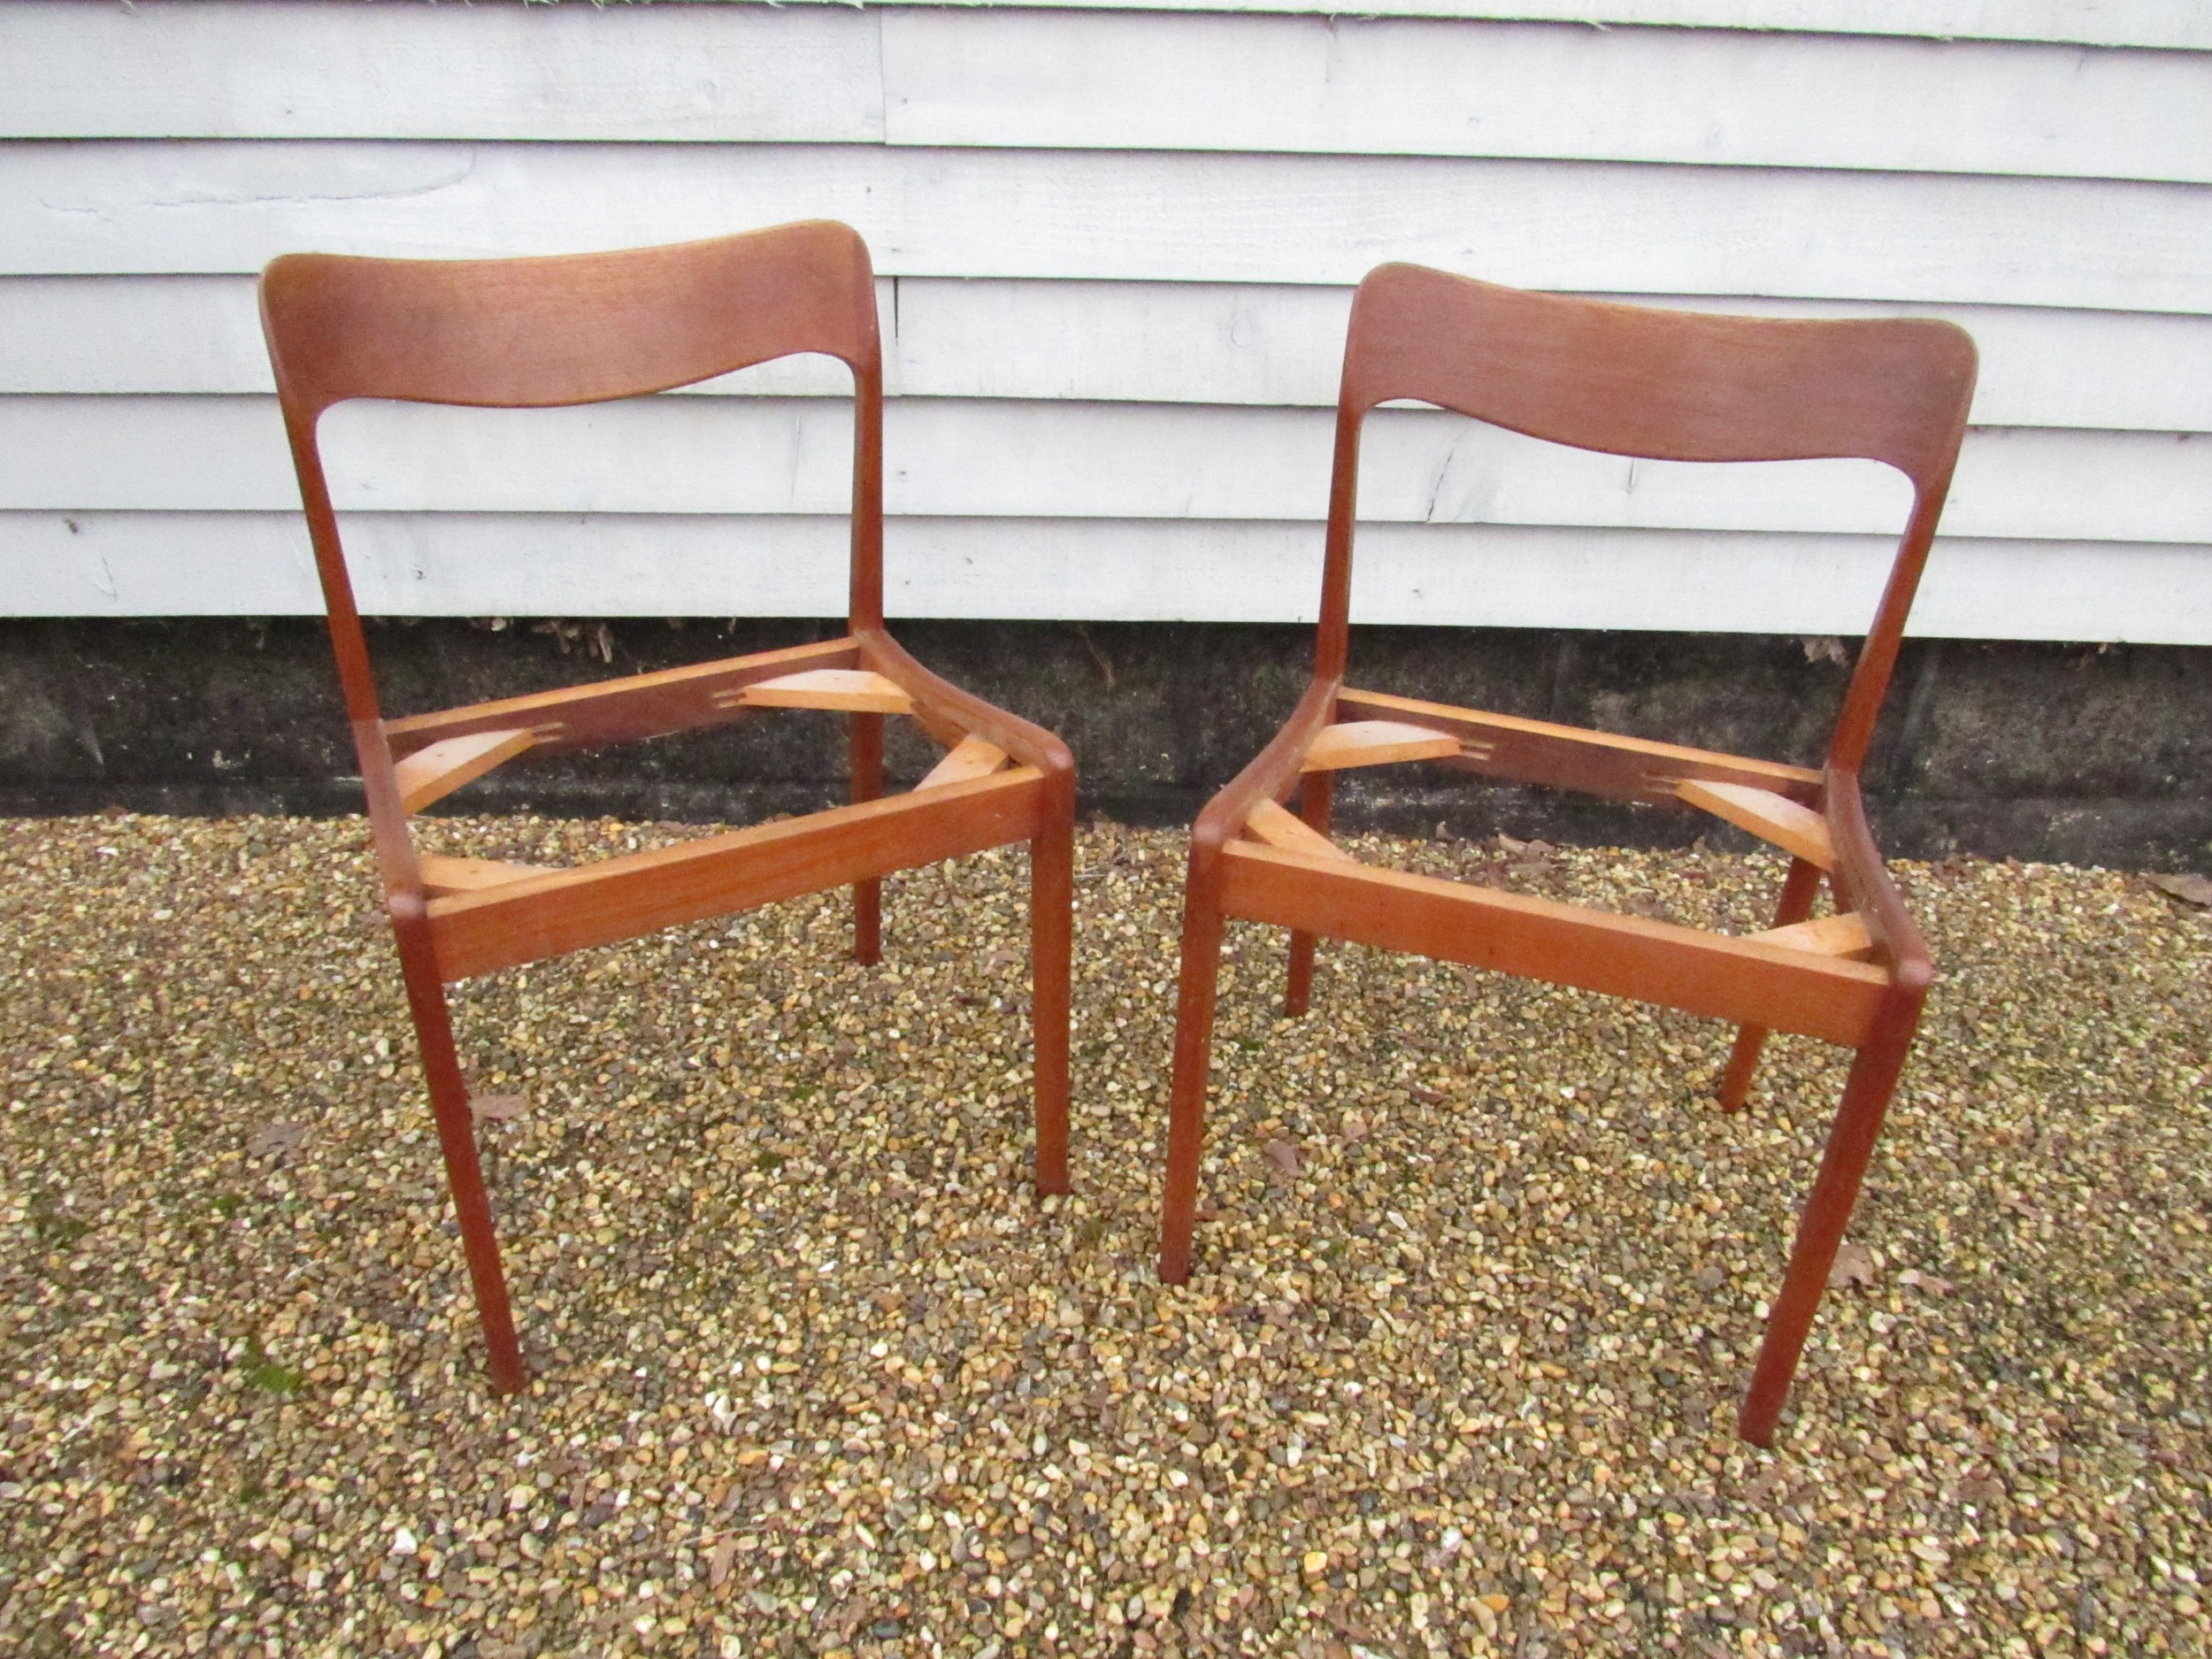 A pair of Danish teak dining chairs, seat pads removed as do not conform with current Fire Safety